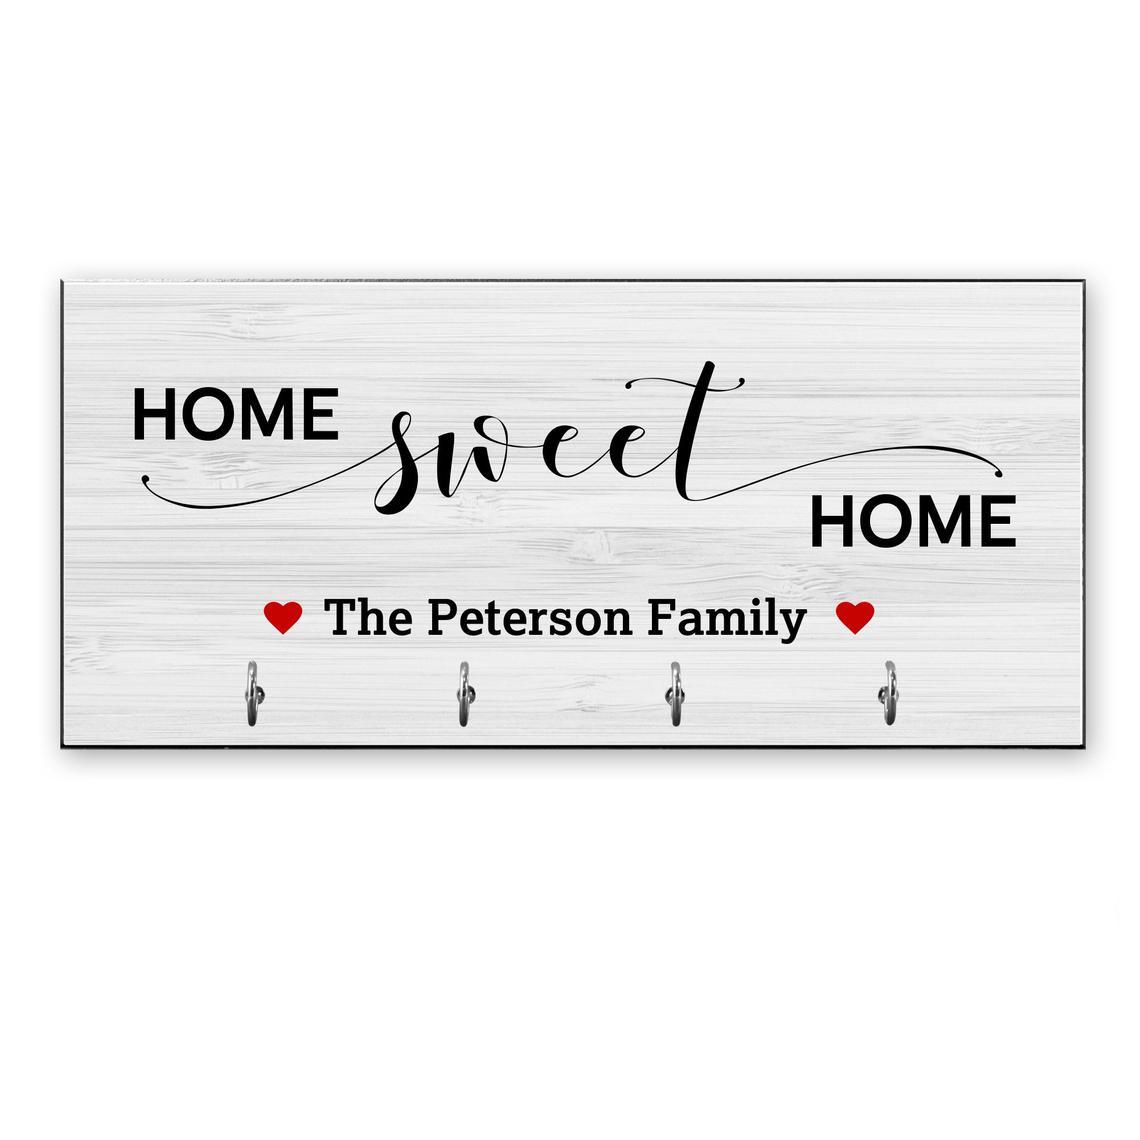 Personalised key ring holder for wall, Personalized housewarming gift